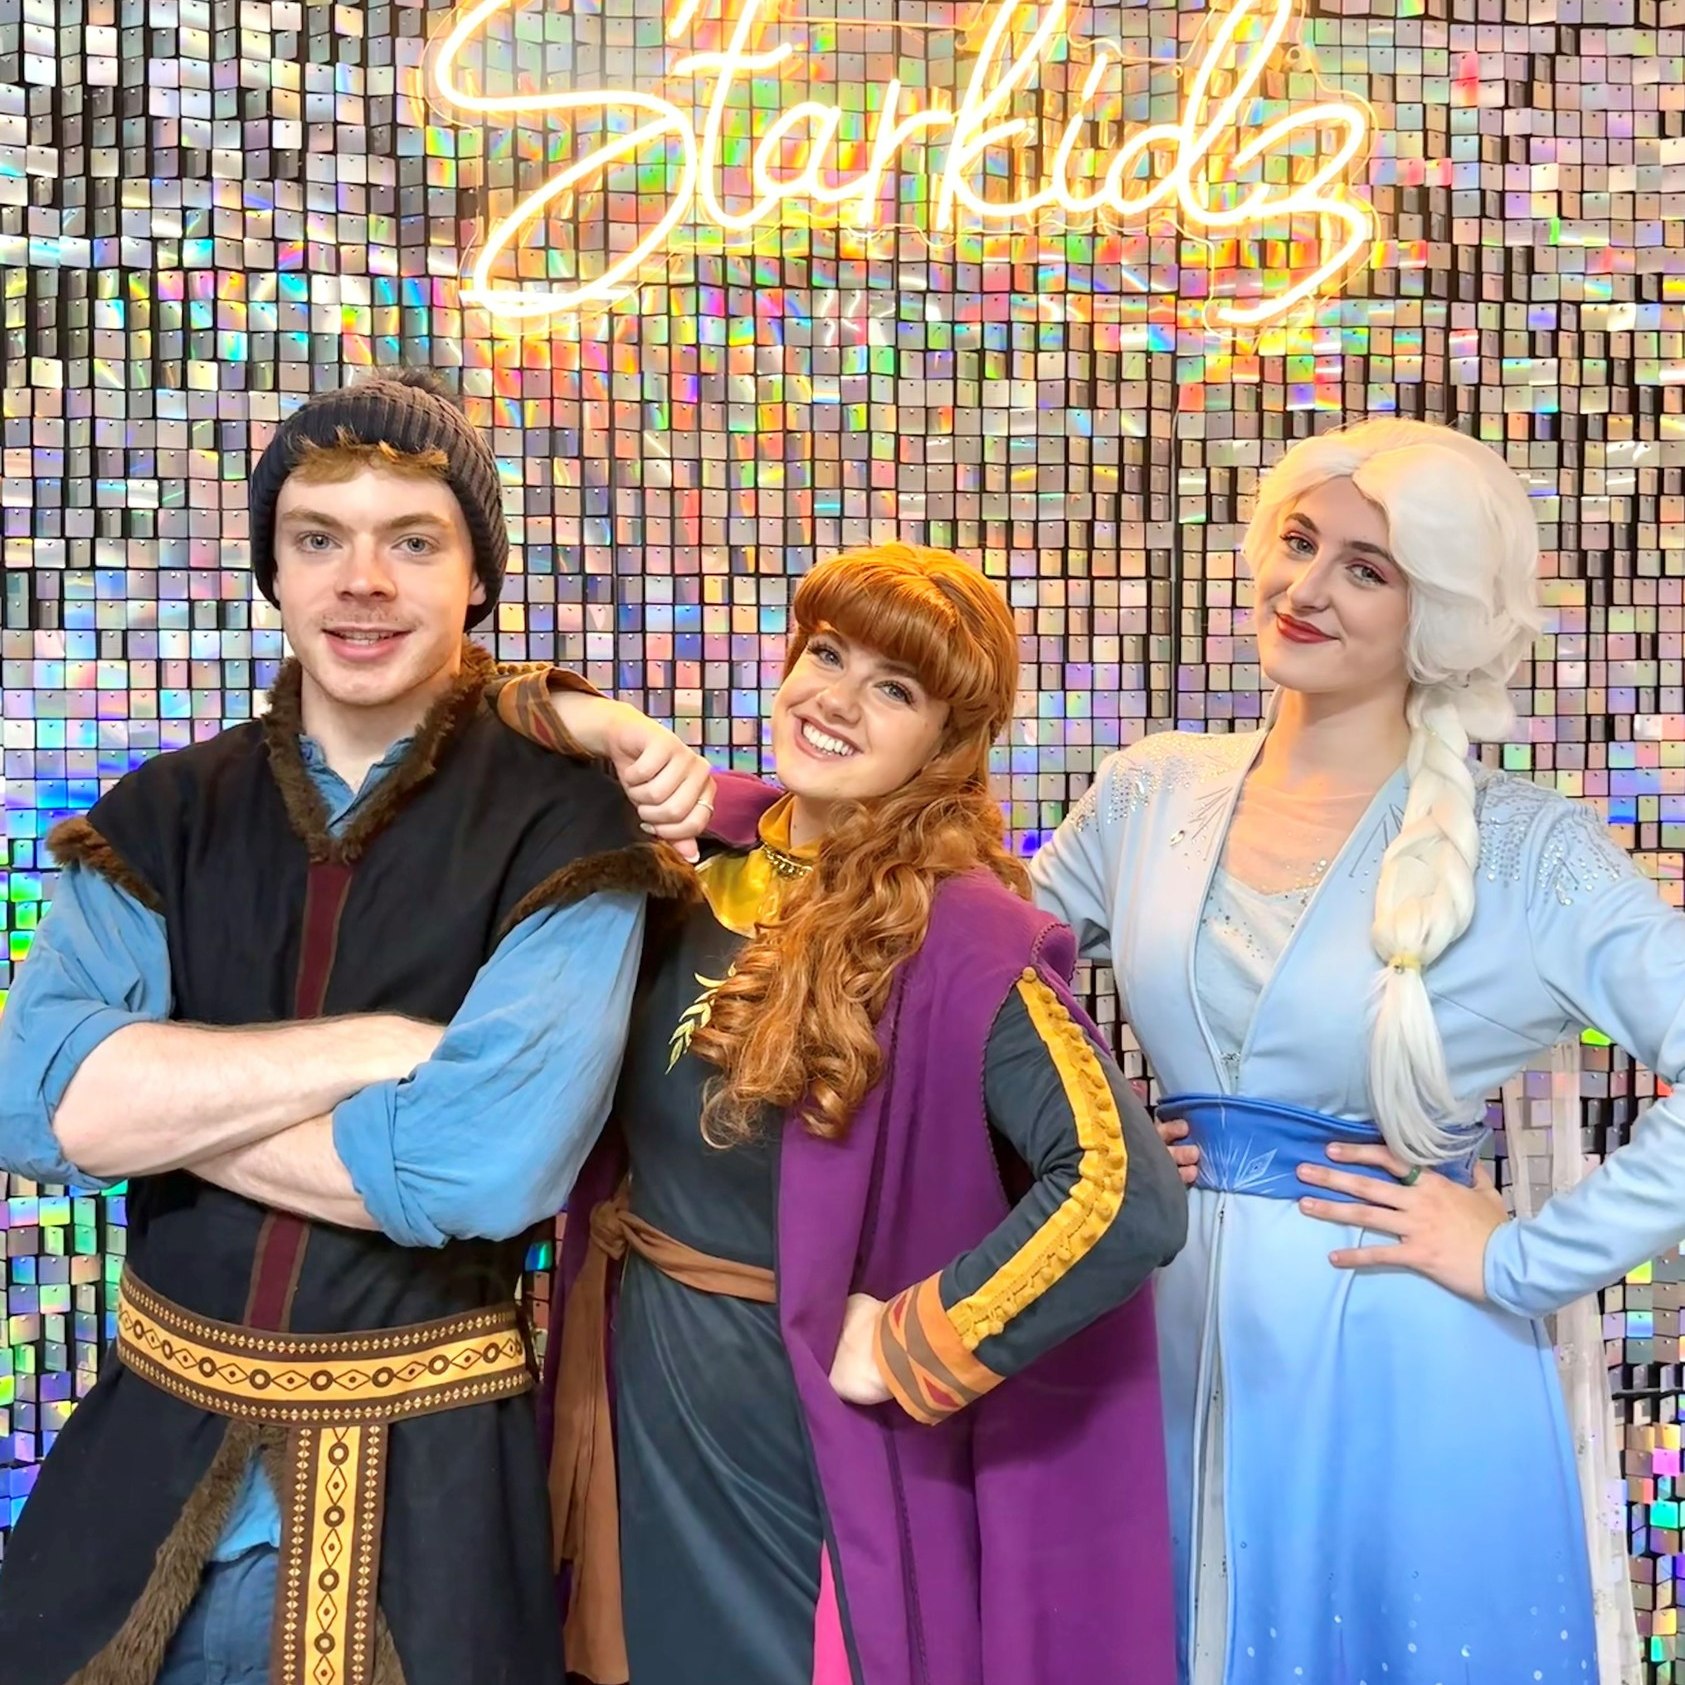 People are invited to enjoy the Southport BID Southport Festive Fun Day. Frozen Singalong Show (StarKidz)